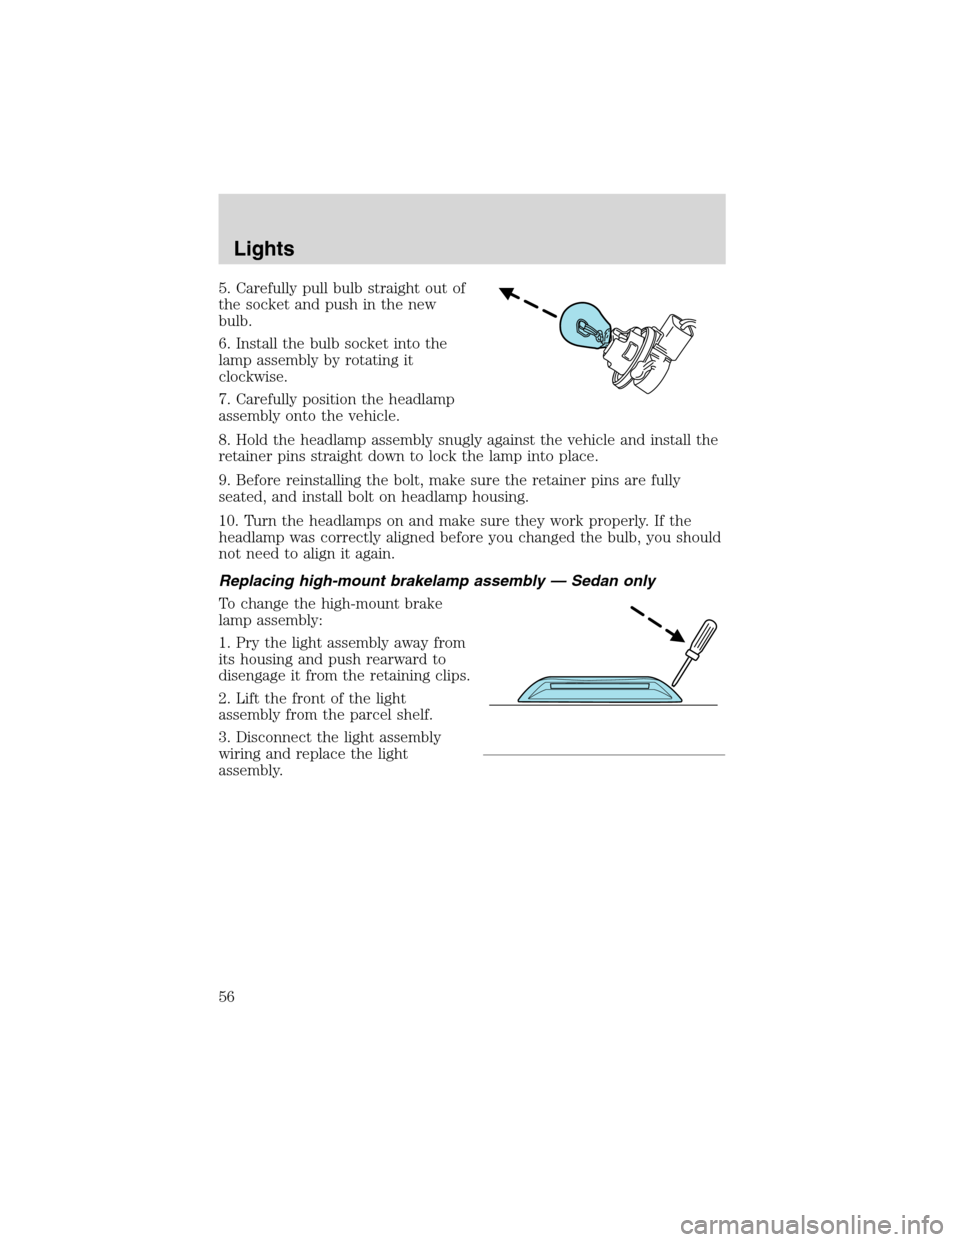 Mercury Sable 2002  s User Guide 5. Carefully pull bulb straight out of
the socket and push in the new
bulb.
6. Install the bulb socket into the
lamp assembly by rotating it
clockwise.
7. Carefully position the headlamp
assembly onto